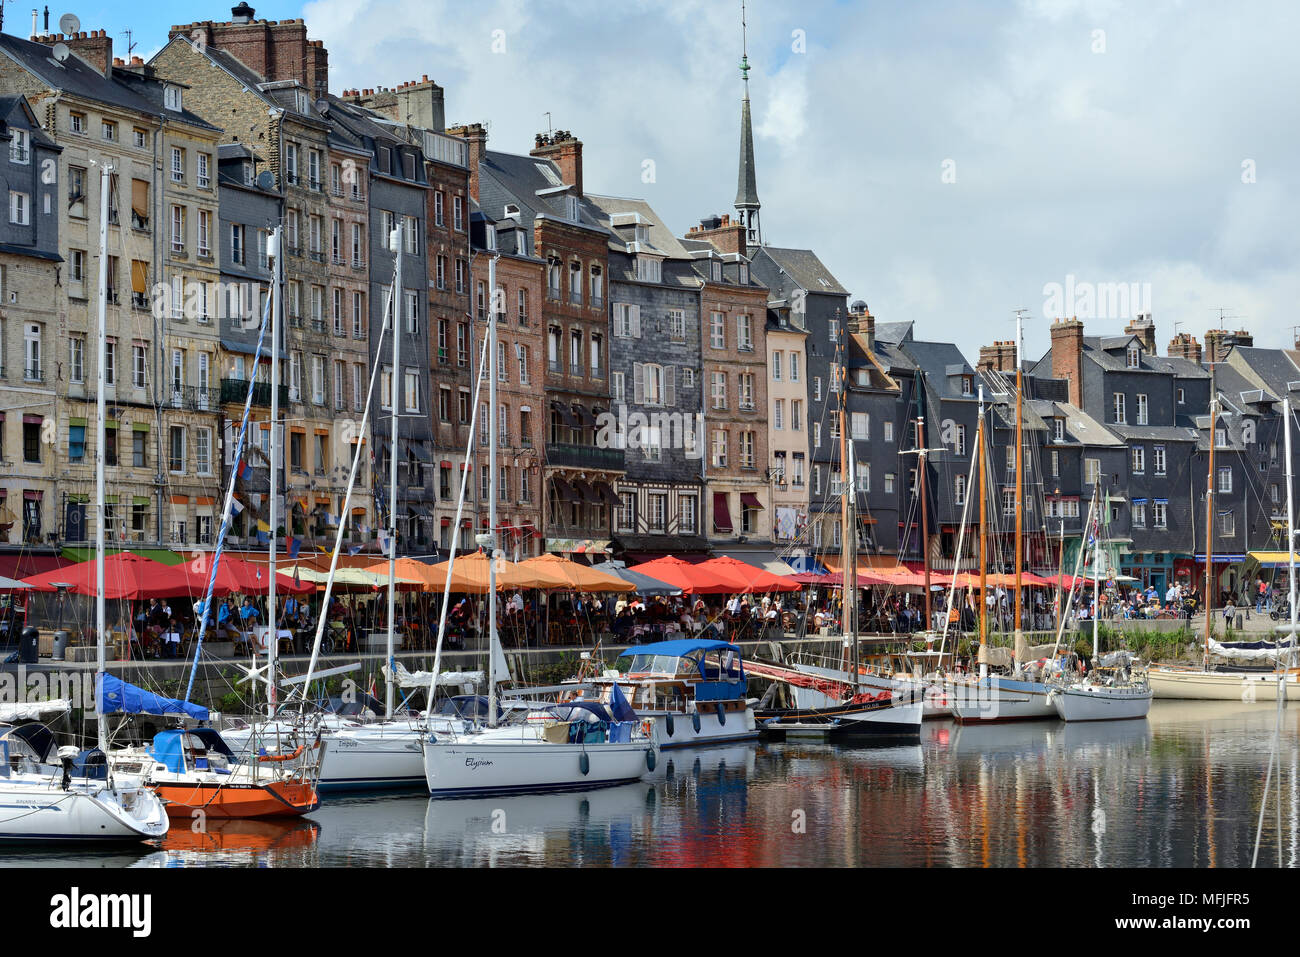 The Vieux Bassin, Old Harbour, St. Catherine's Quay, Honfleur, Calvados, Basse Normandie (Normandy), France, Europe Stock Photo